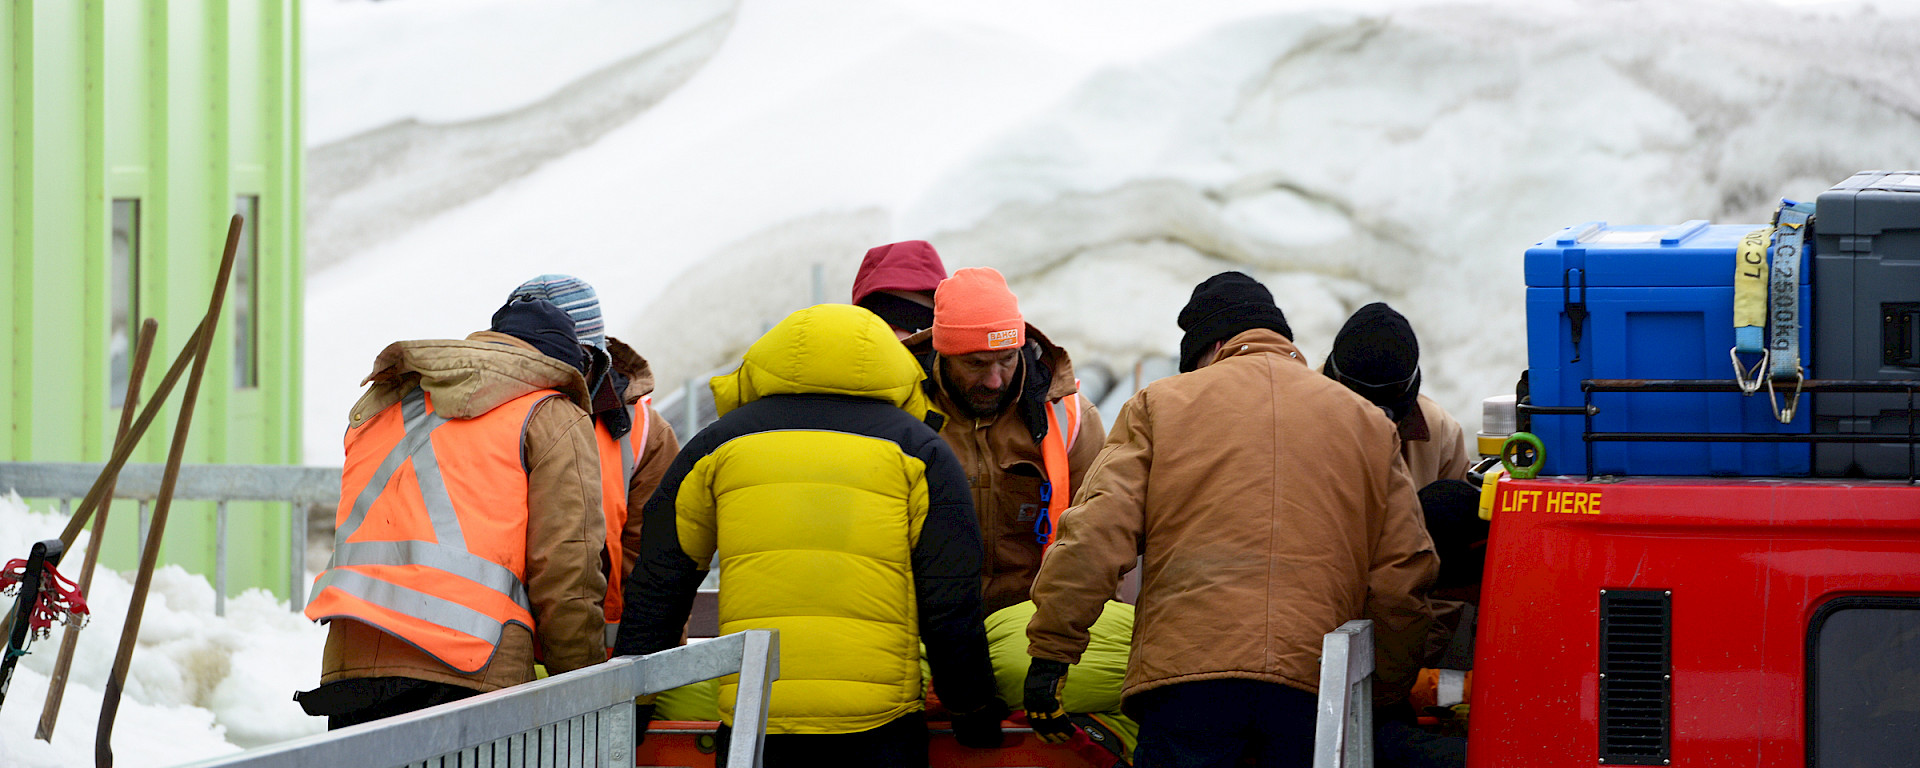 Expeditioners at Davis station assist their injured colleague